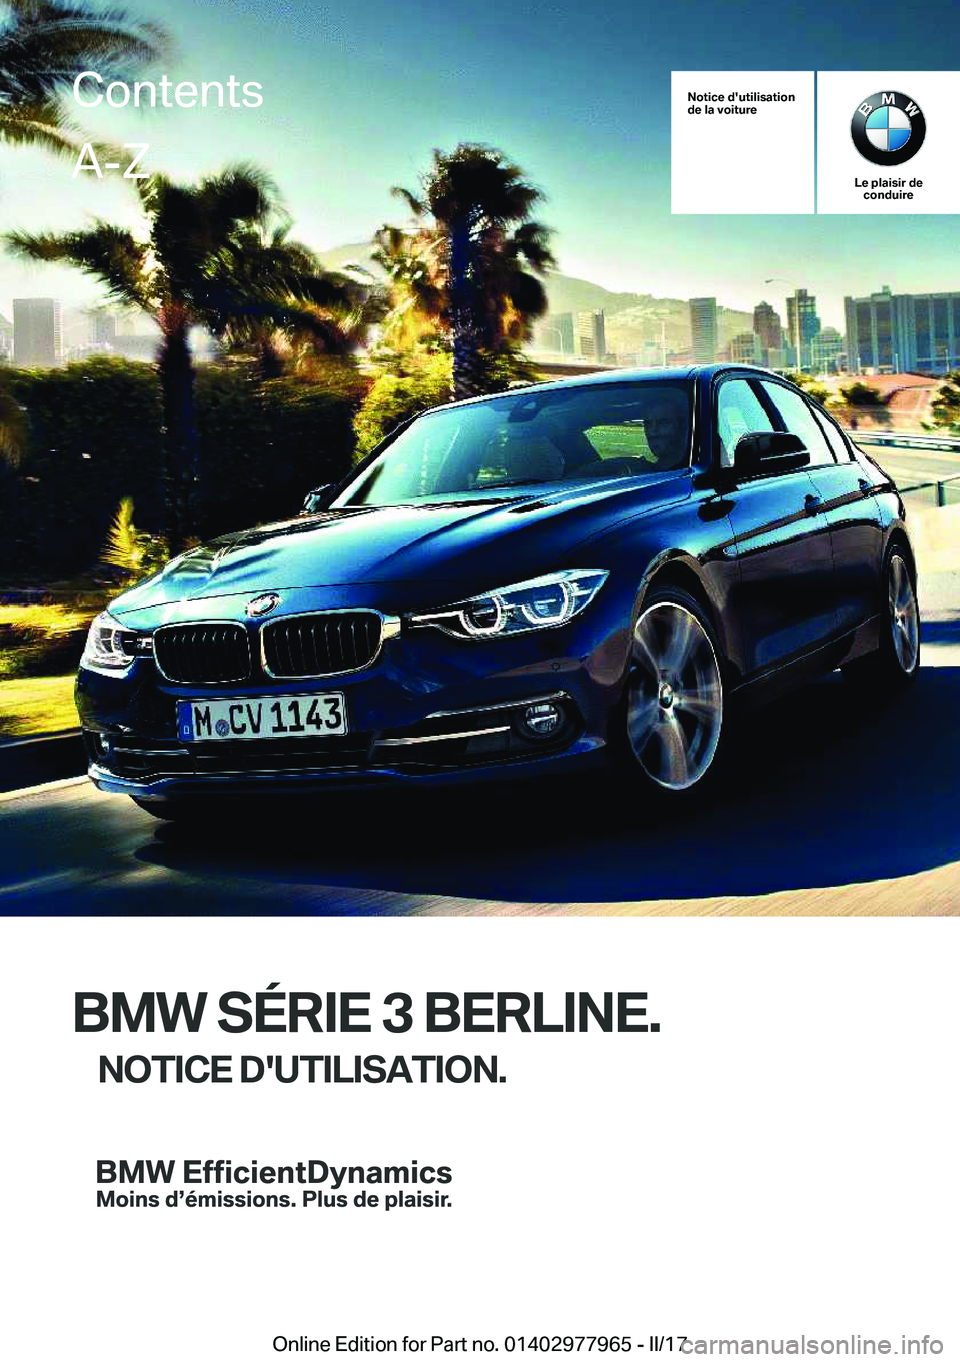 BMW 3 SERIES 2017  Notices Demploi (in French) �N�o�t�i�c�e��d�'�u�t�i�l�i�s�a�t�i�o�n
�d�e��l�a��v�o�i�t�u�r�e
�L�e��p�l�a�i�s�i�r��d�e �c�o�n�d�u�i�r�e
�B�M�W��S�